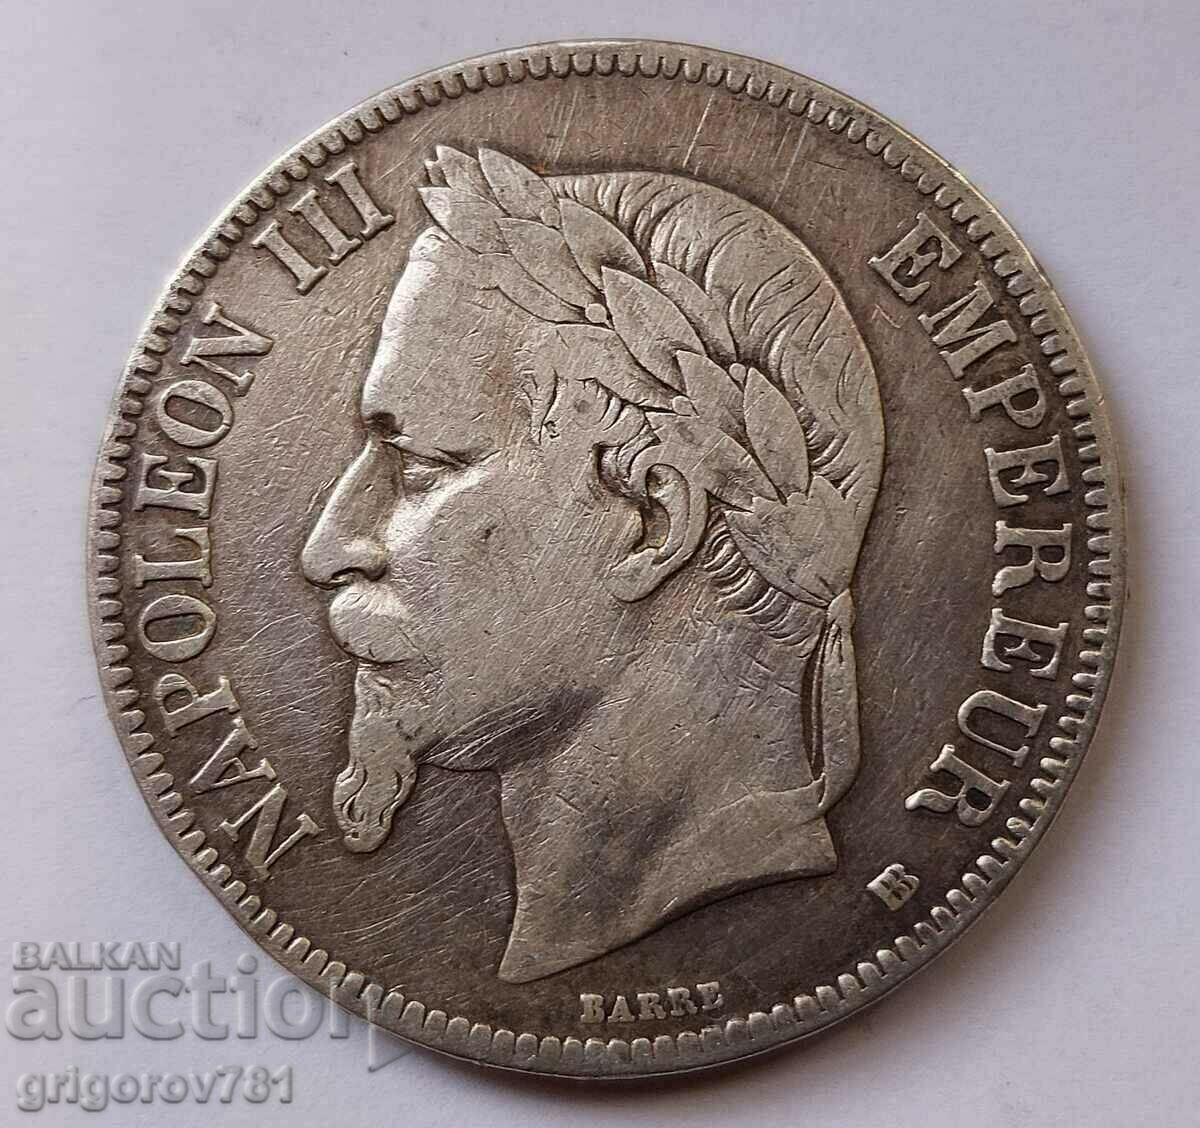 5 Francs Silver France 1868 BB - Silver Coin #82